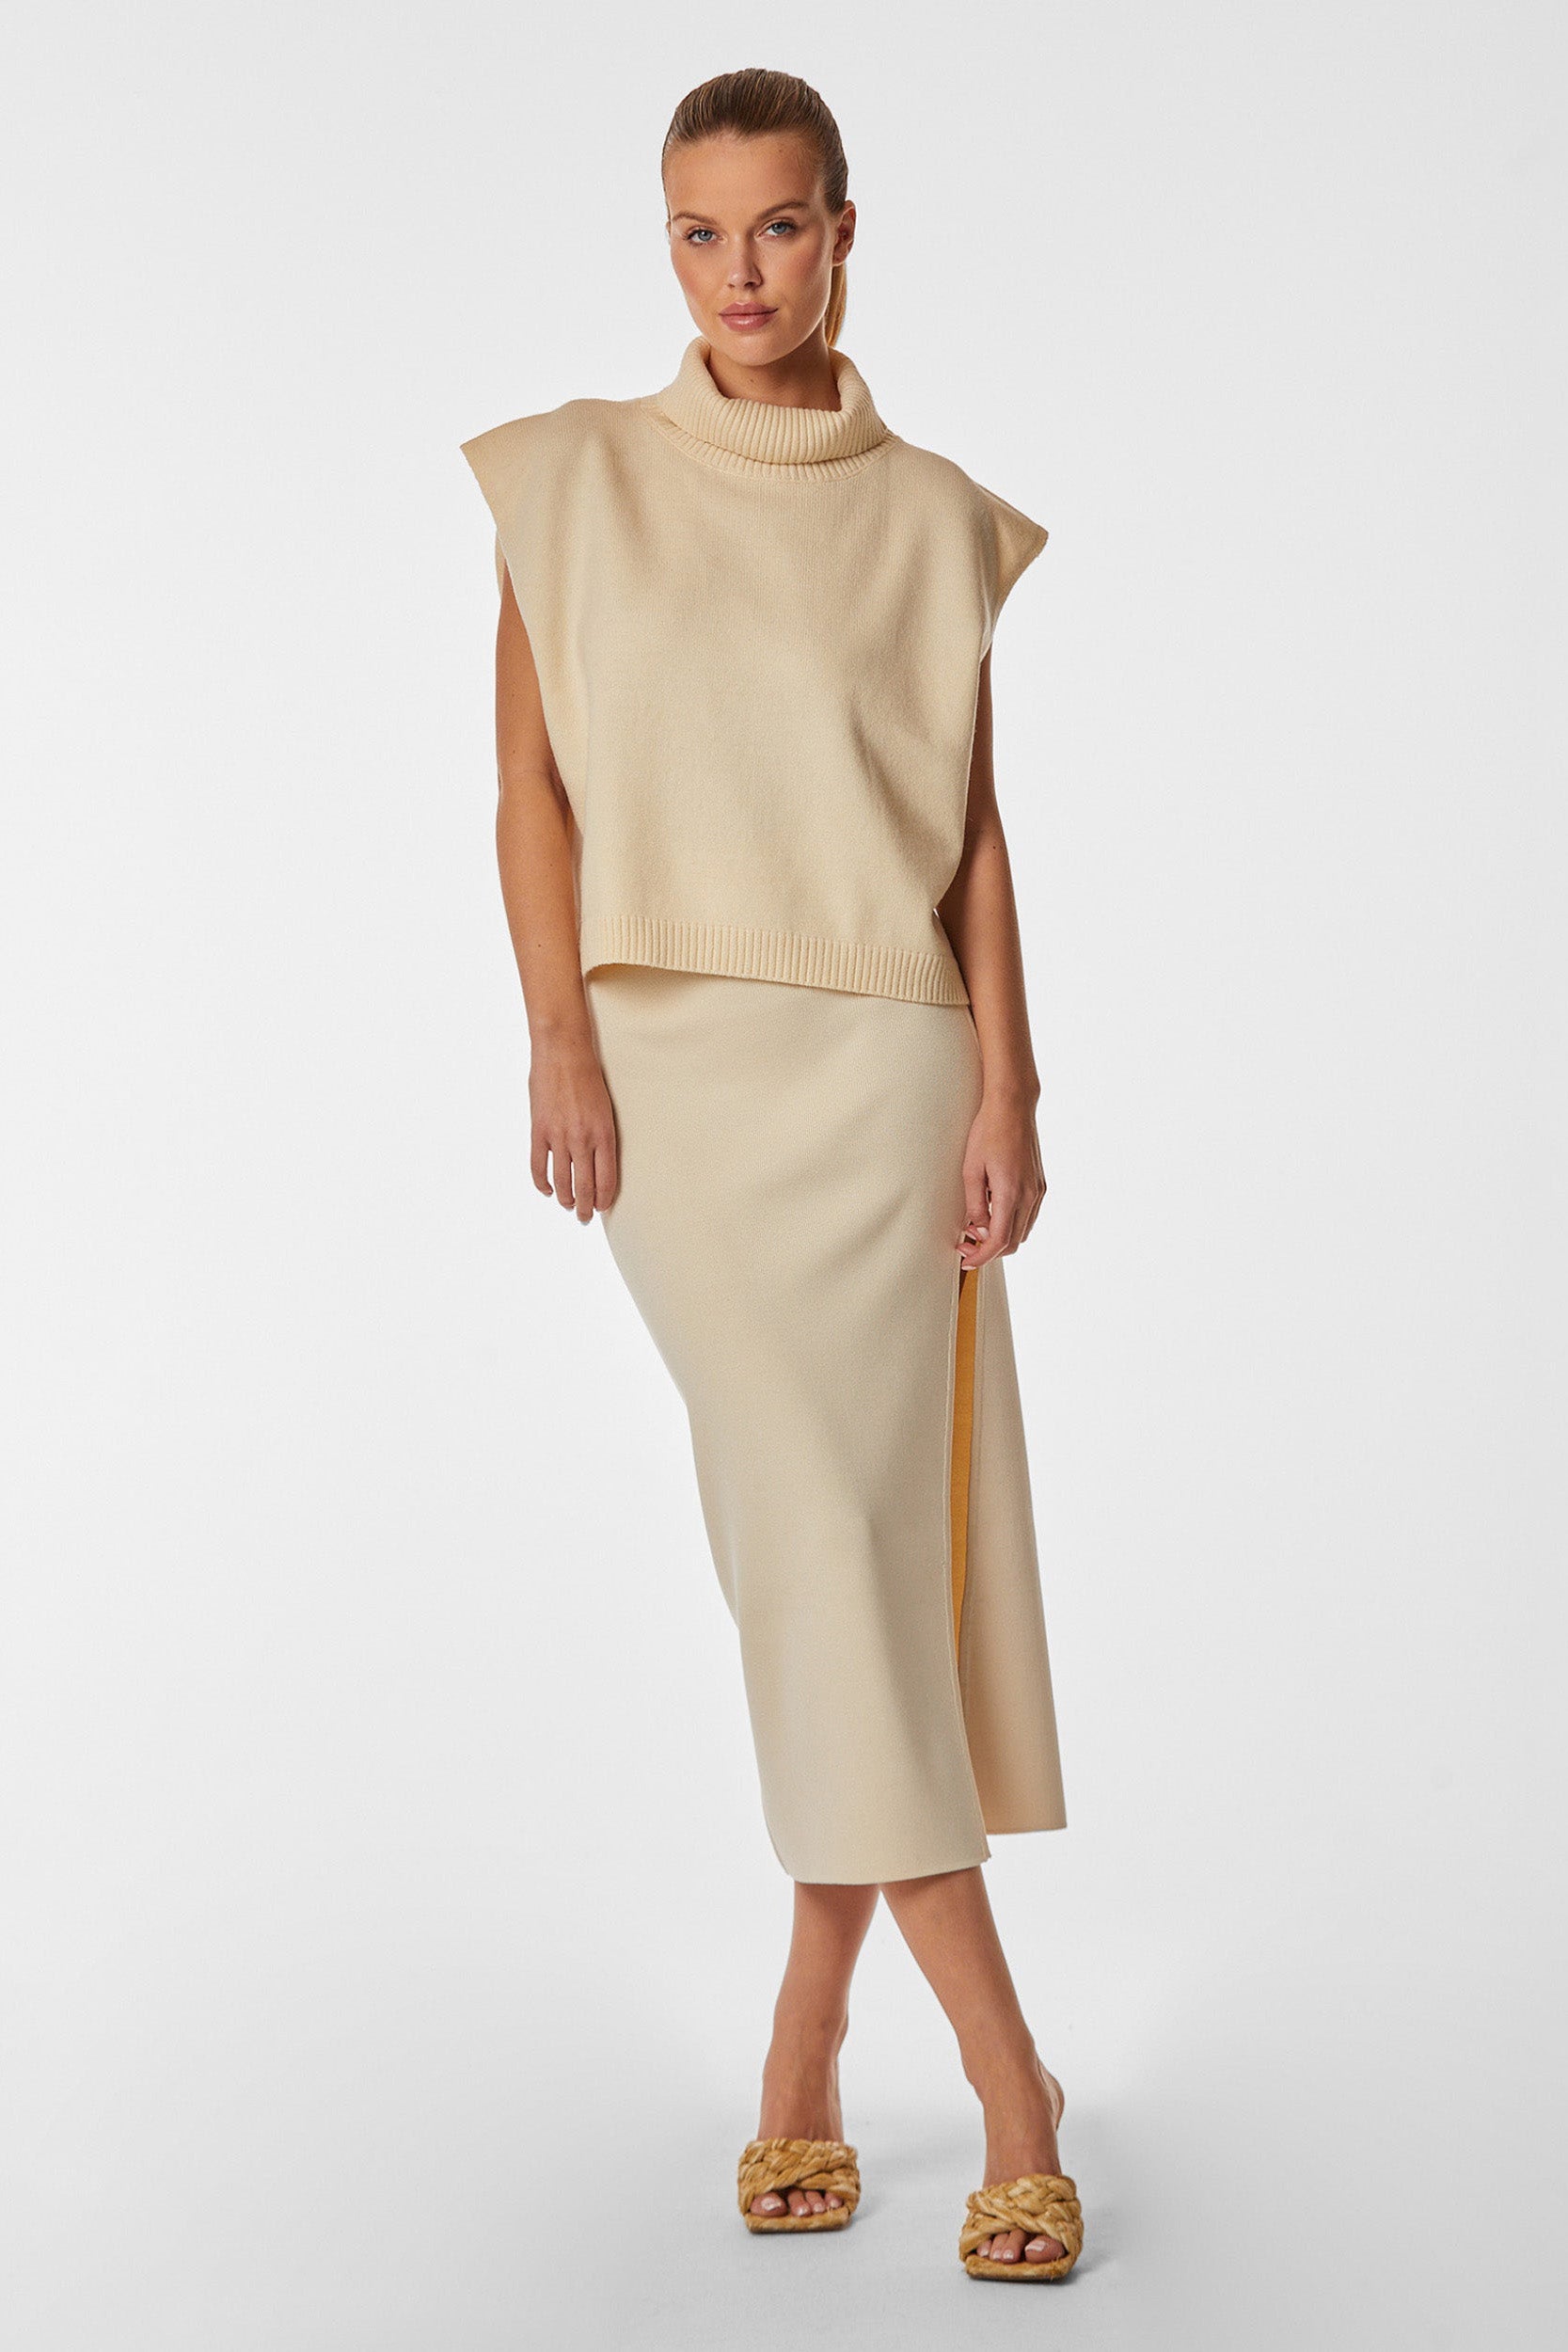 A person is standing against a plain white background wearing a beige sleeveless turtleneck sweater paired with the Hamptons Midi Skirt - Pearl, featuring a front slit and slim-fitted silhouette. They are also wearing yellow textured sandals. The person's hair is pulled back in a sleek style, and they have a neutral expression.